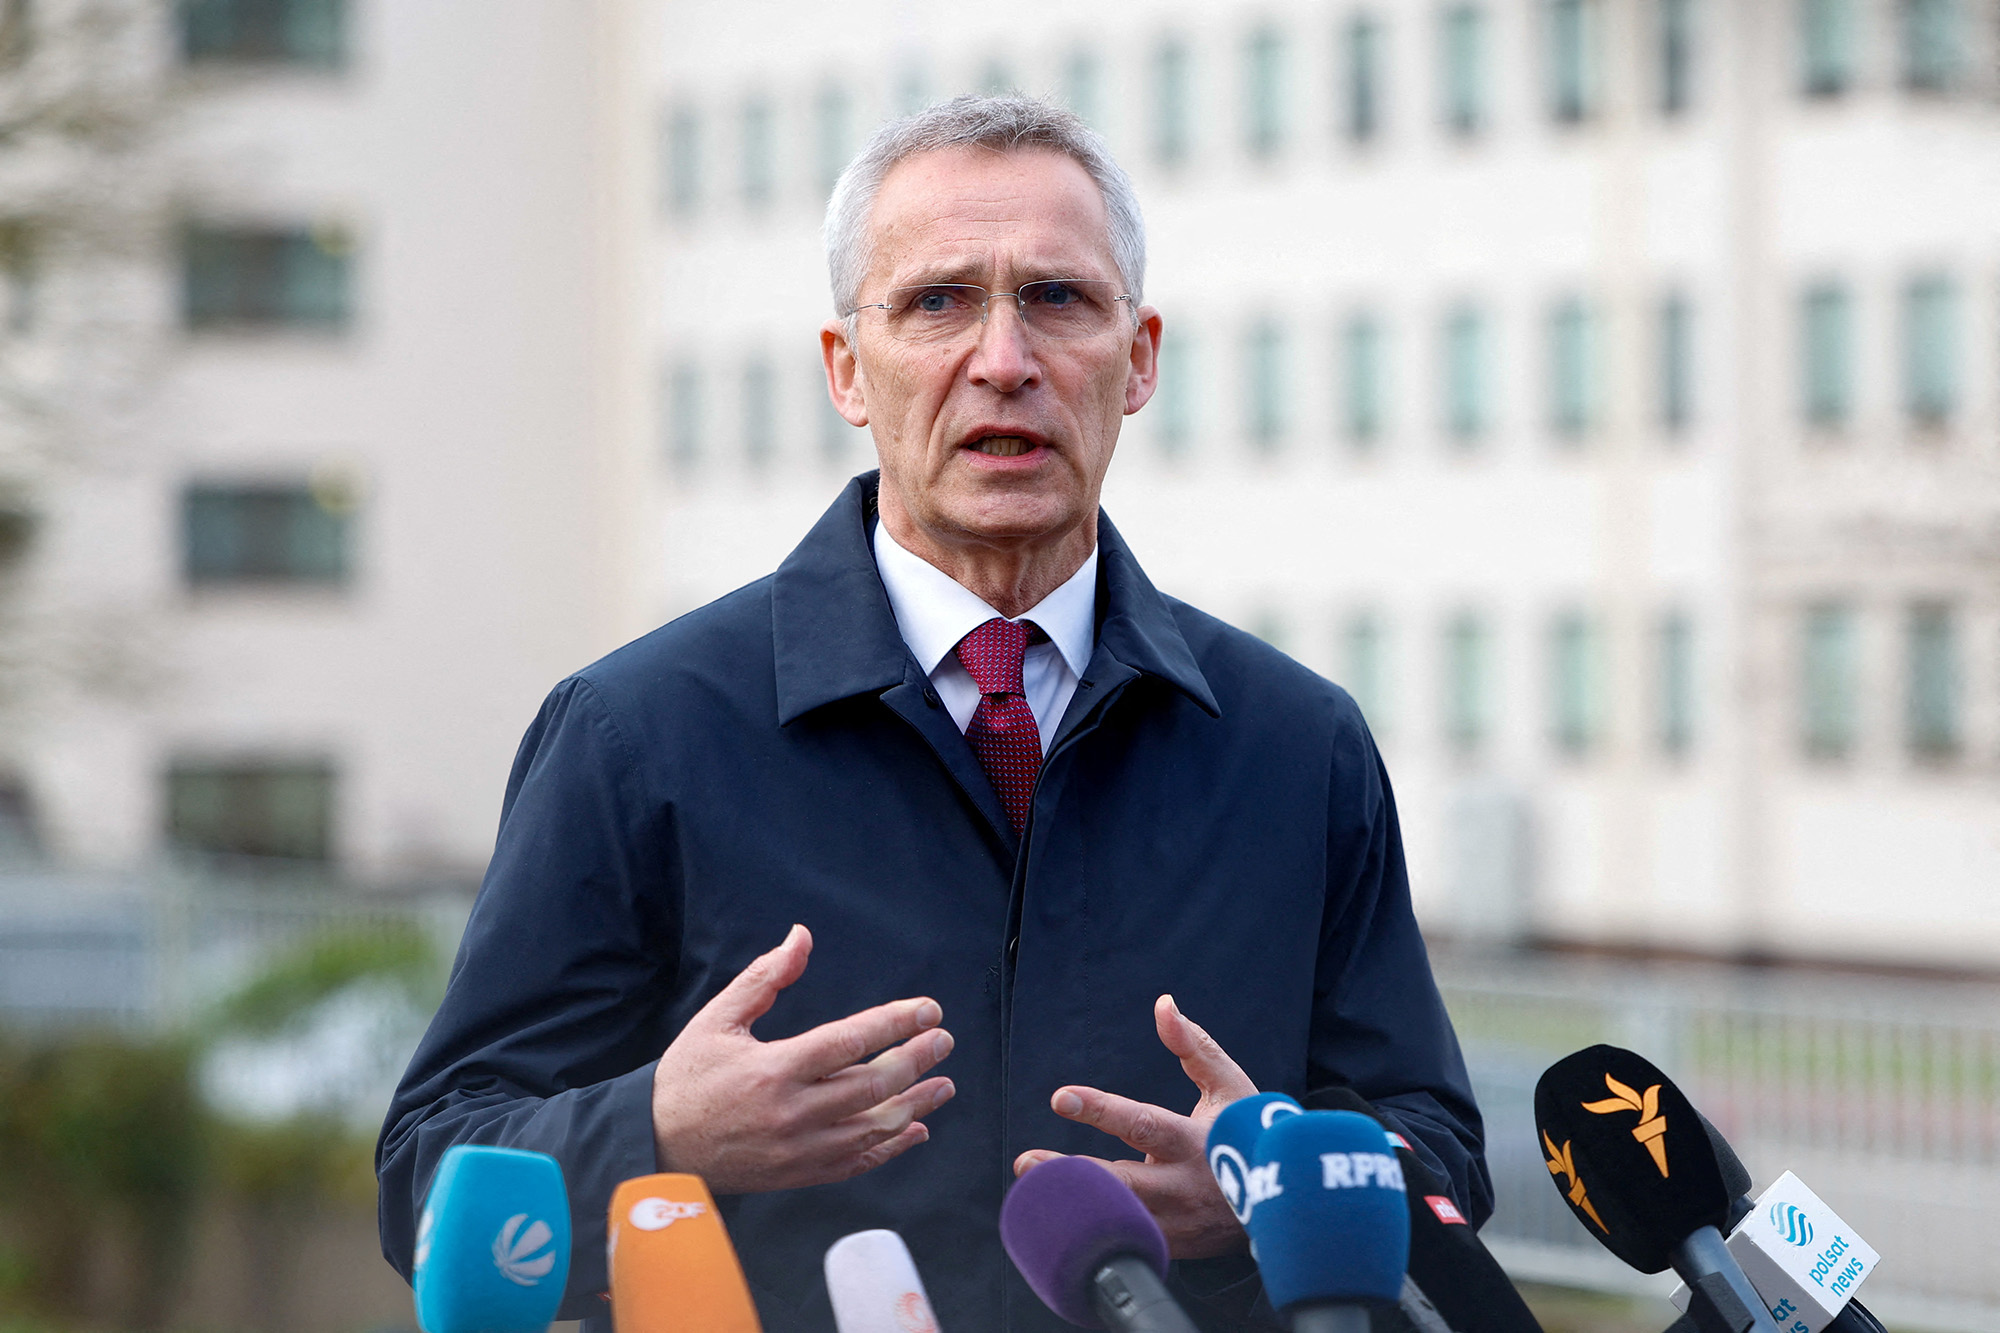 NATO Secretary-General Jens Stoltenberg speaks to the media as he visits Ramstein U.S. Air Base, Germany, on April 21.